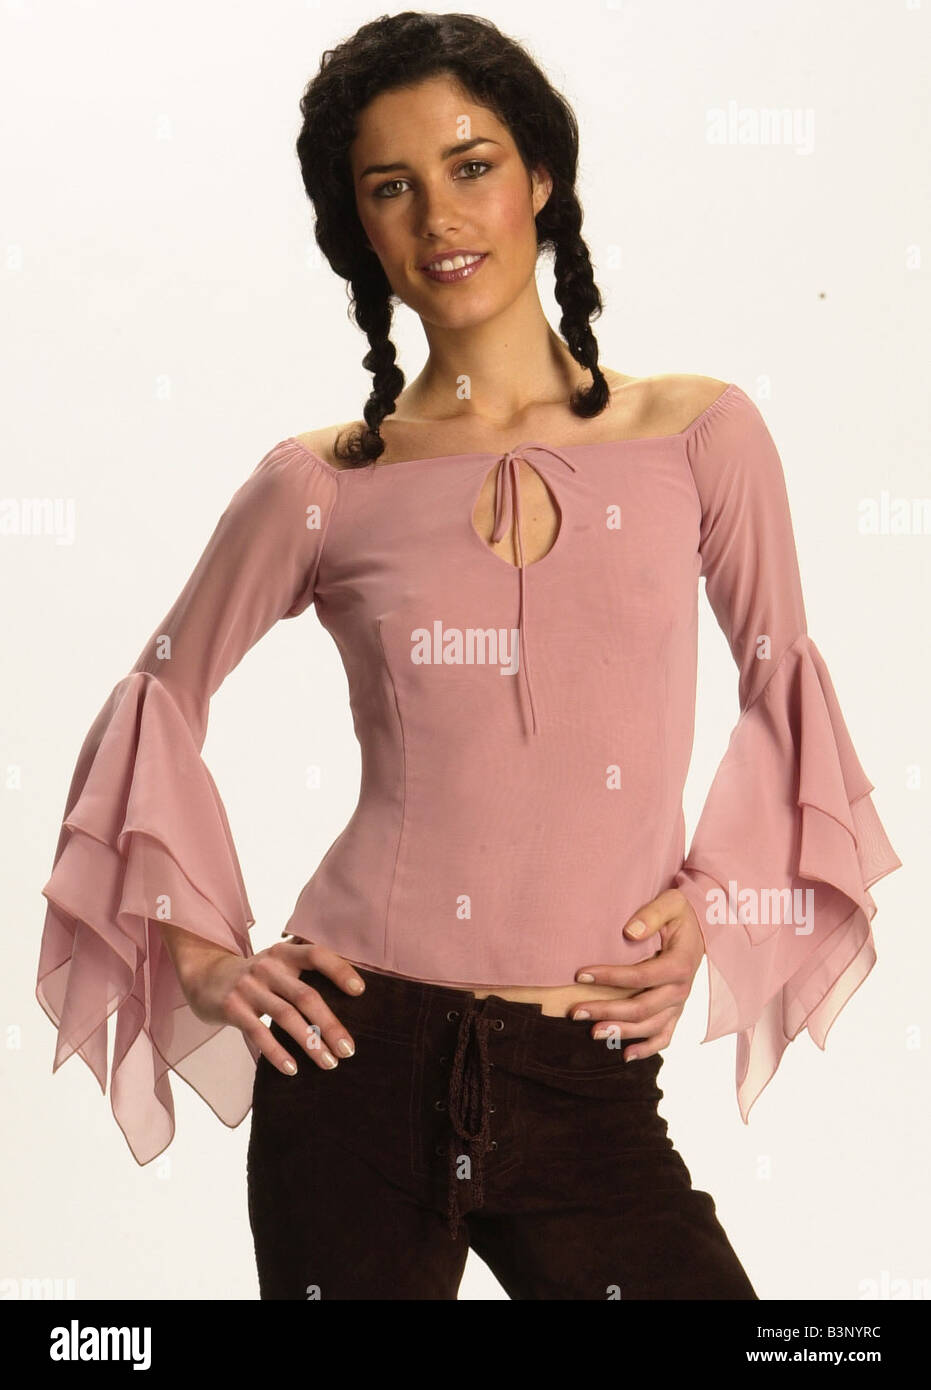 Fashion Feature June 2002 Romantic Tops Feature A model wearing a pink top  with flared sleeves and trousers Stock Photo - Alamy